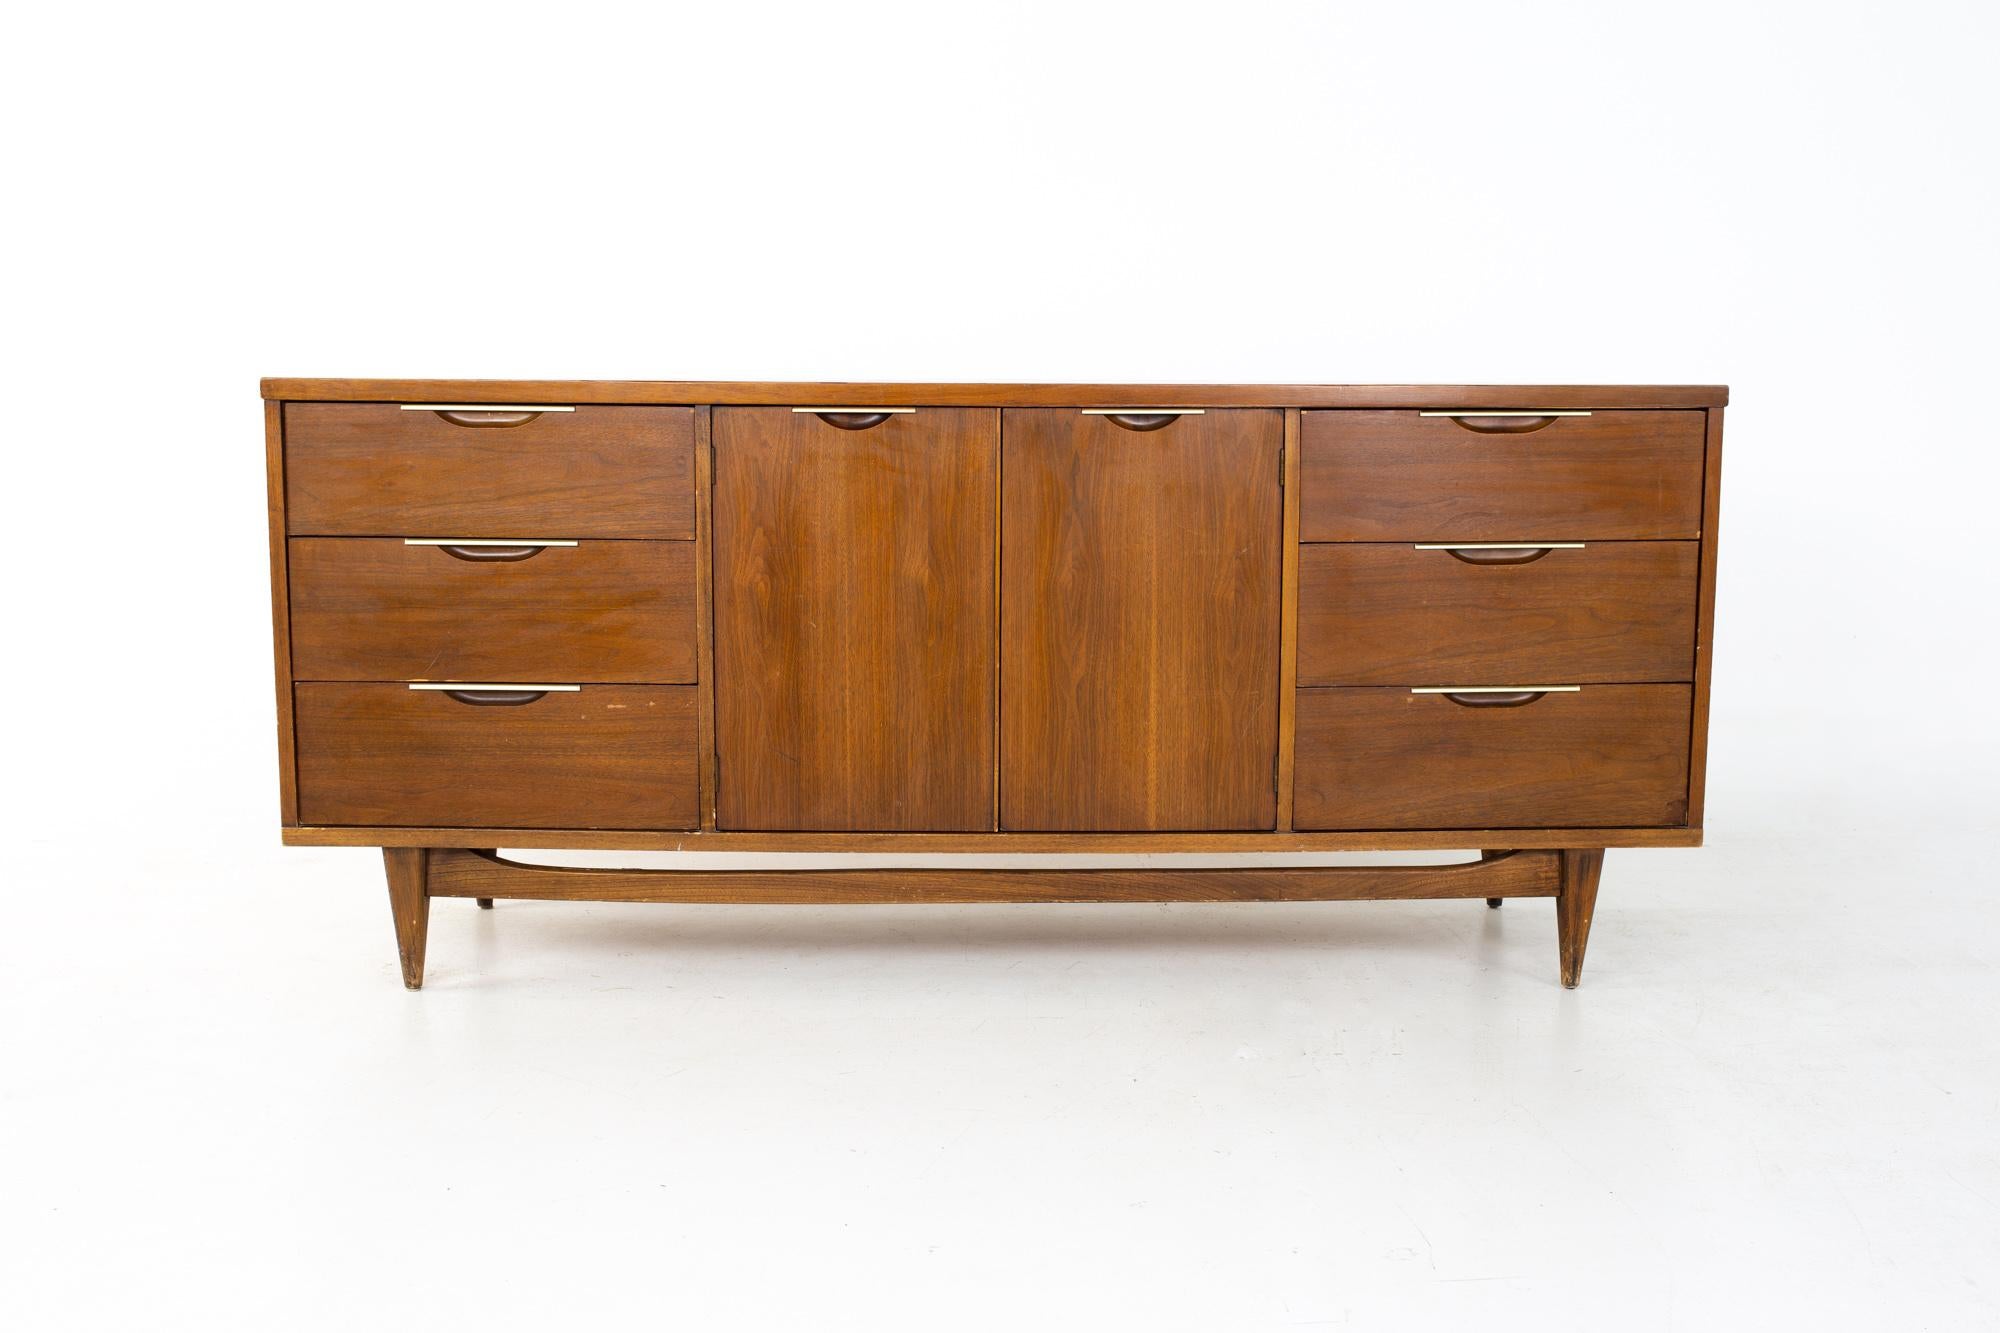 Kent Coffey Tableau mid century walnut and stainless 9 drawer lowboy dresser credenza
Credenza measures: 72 wide x 19 deep x 31.25 inches high

All pieces of furniture can be had in what we call restored vintage condition. That means the piece is